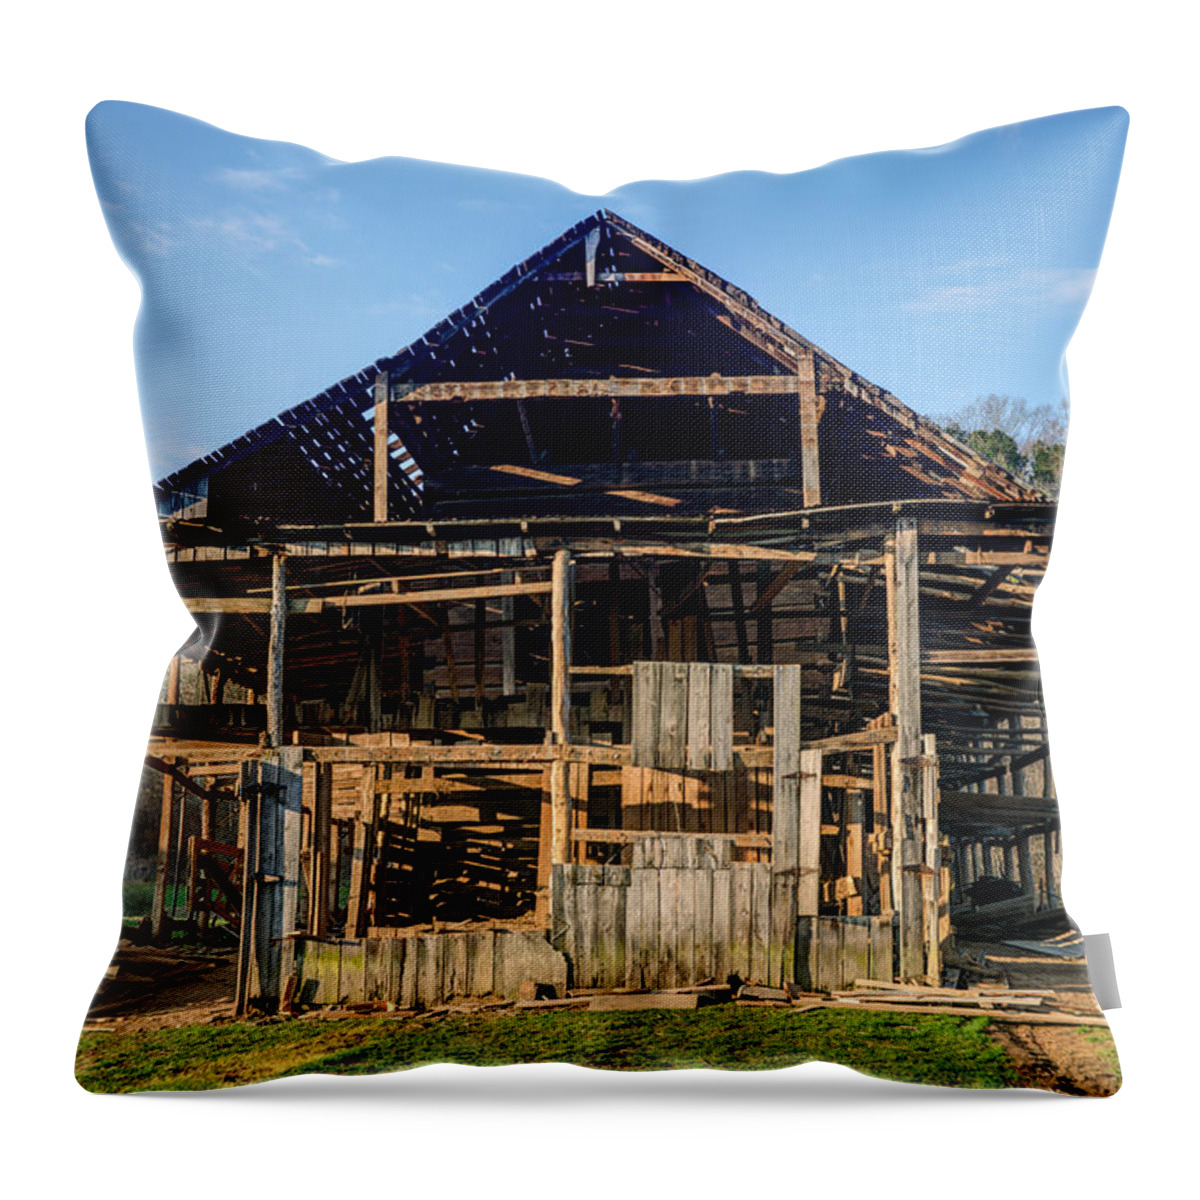 1800s Throw Pillow featuring the photograph 1800s Barn Being Dismantled by Douglas Barnett